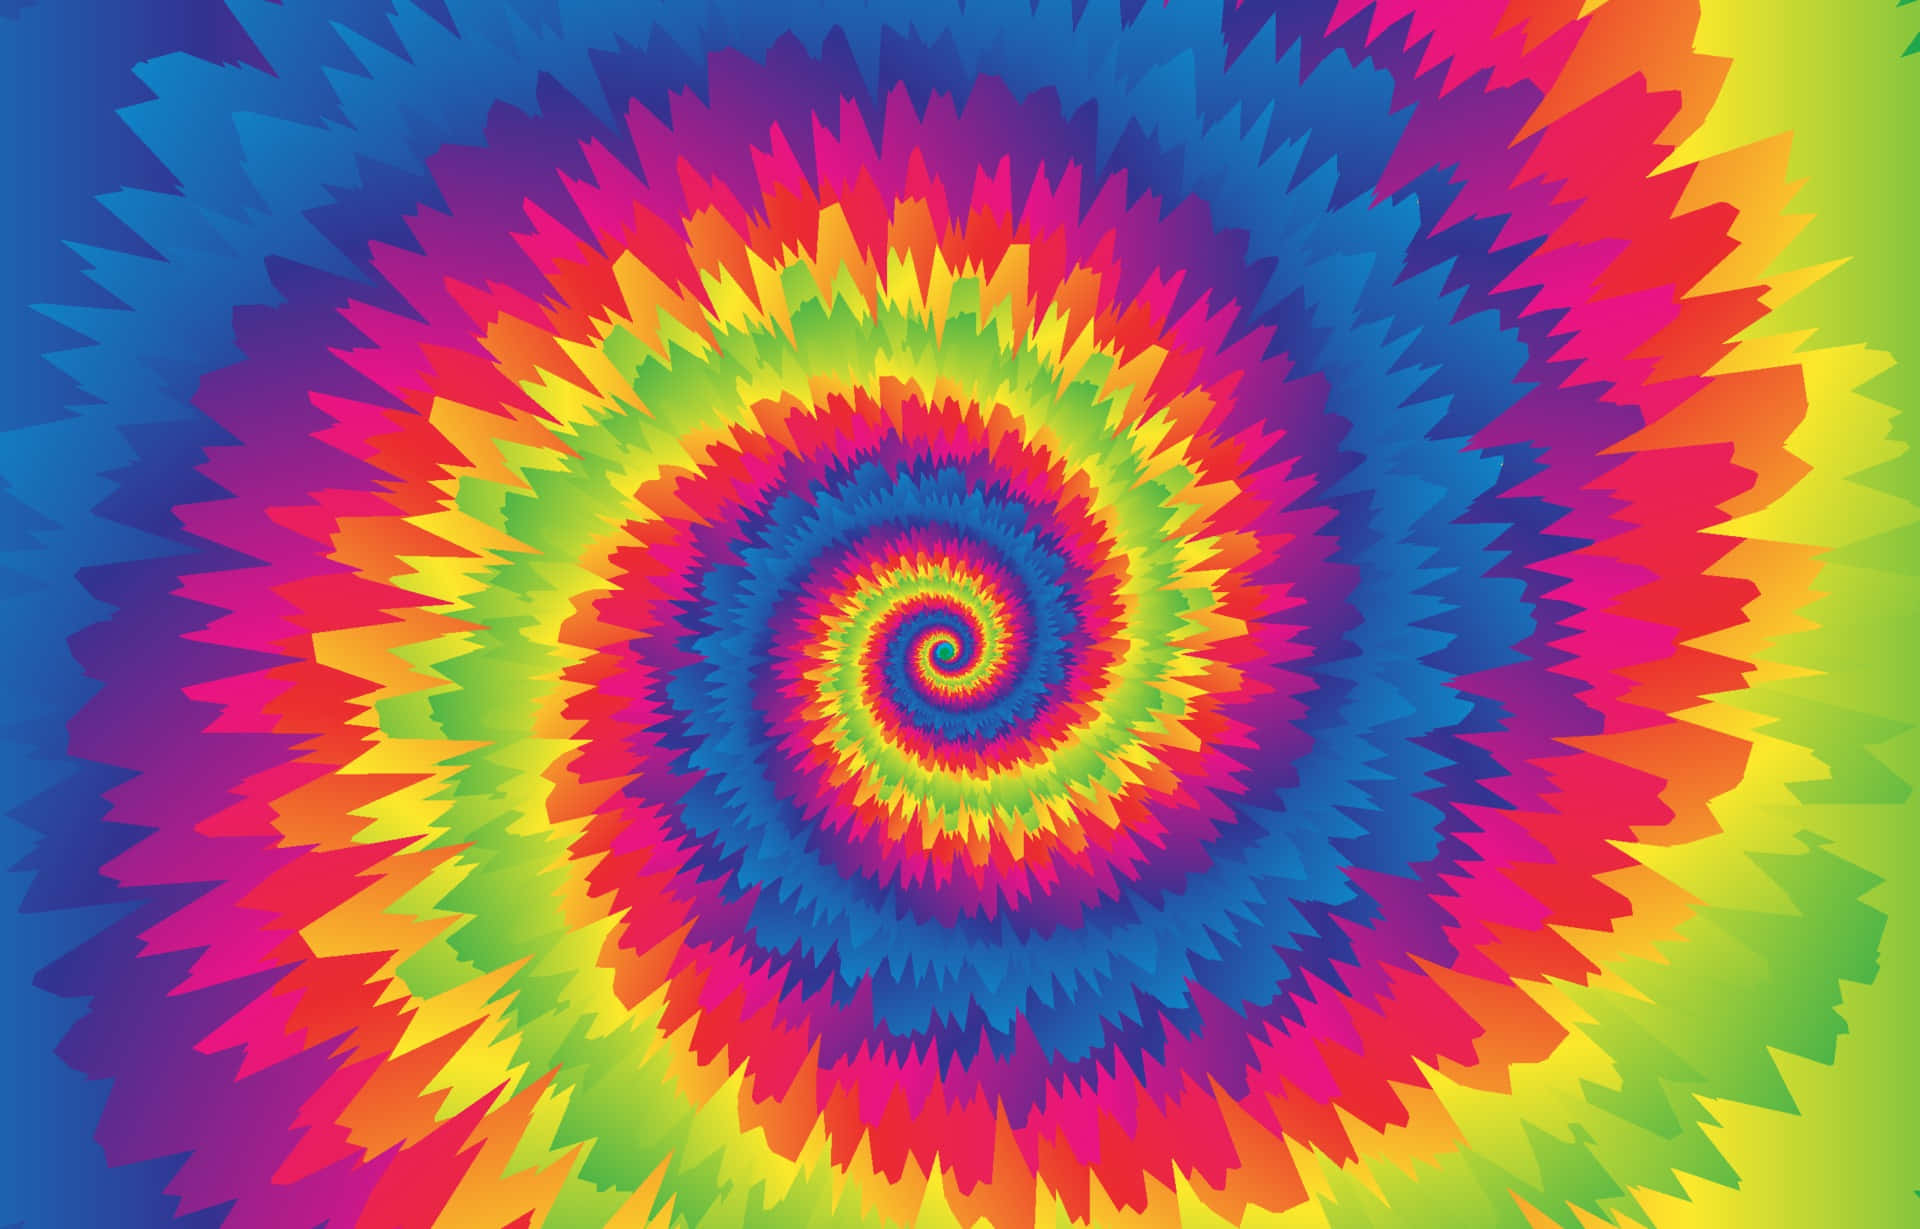 A Colorful Spiral Design With A Rainbow Background